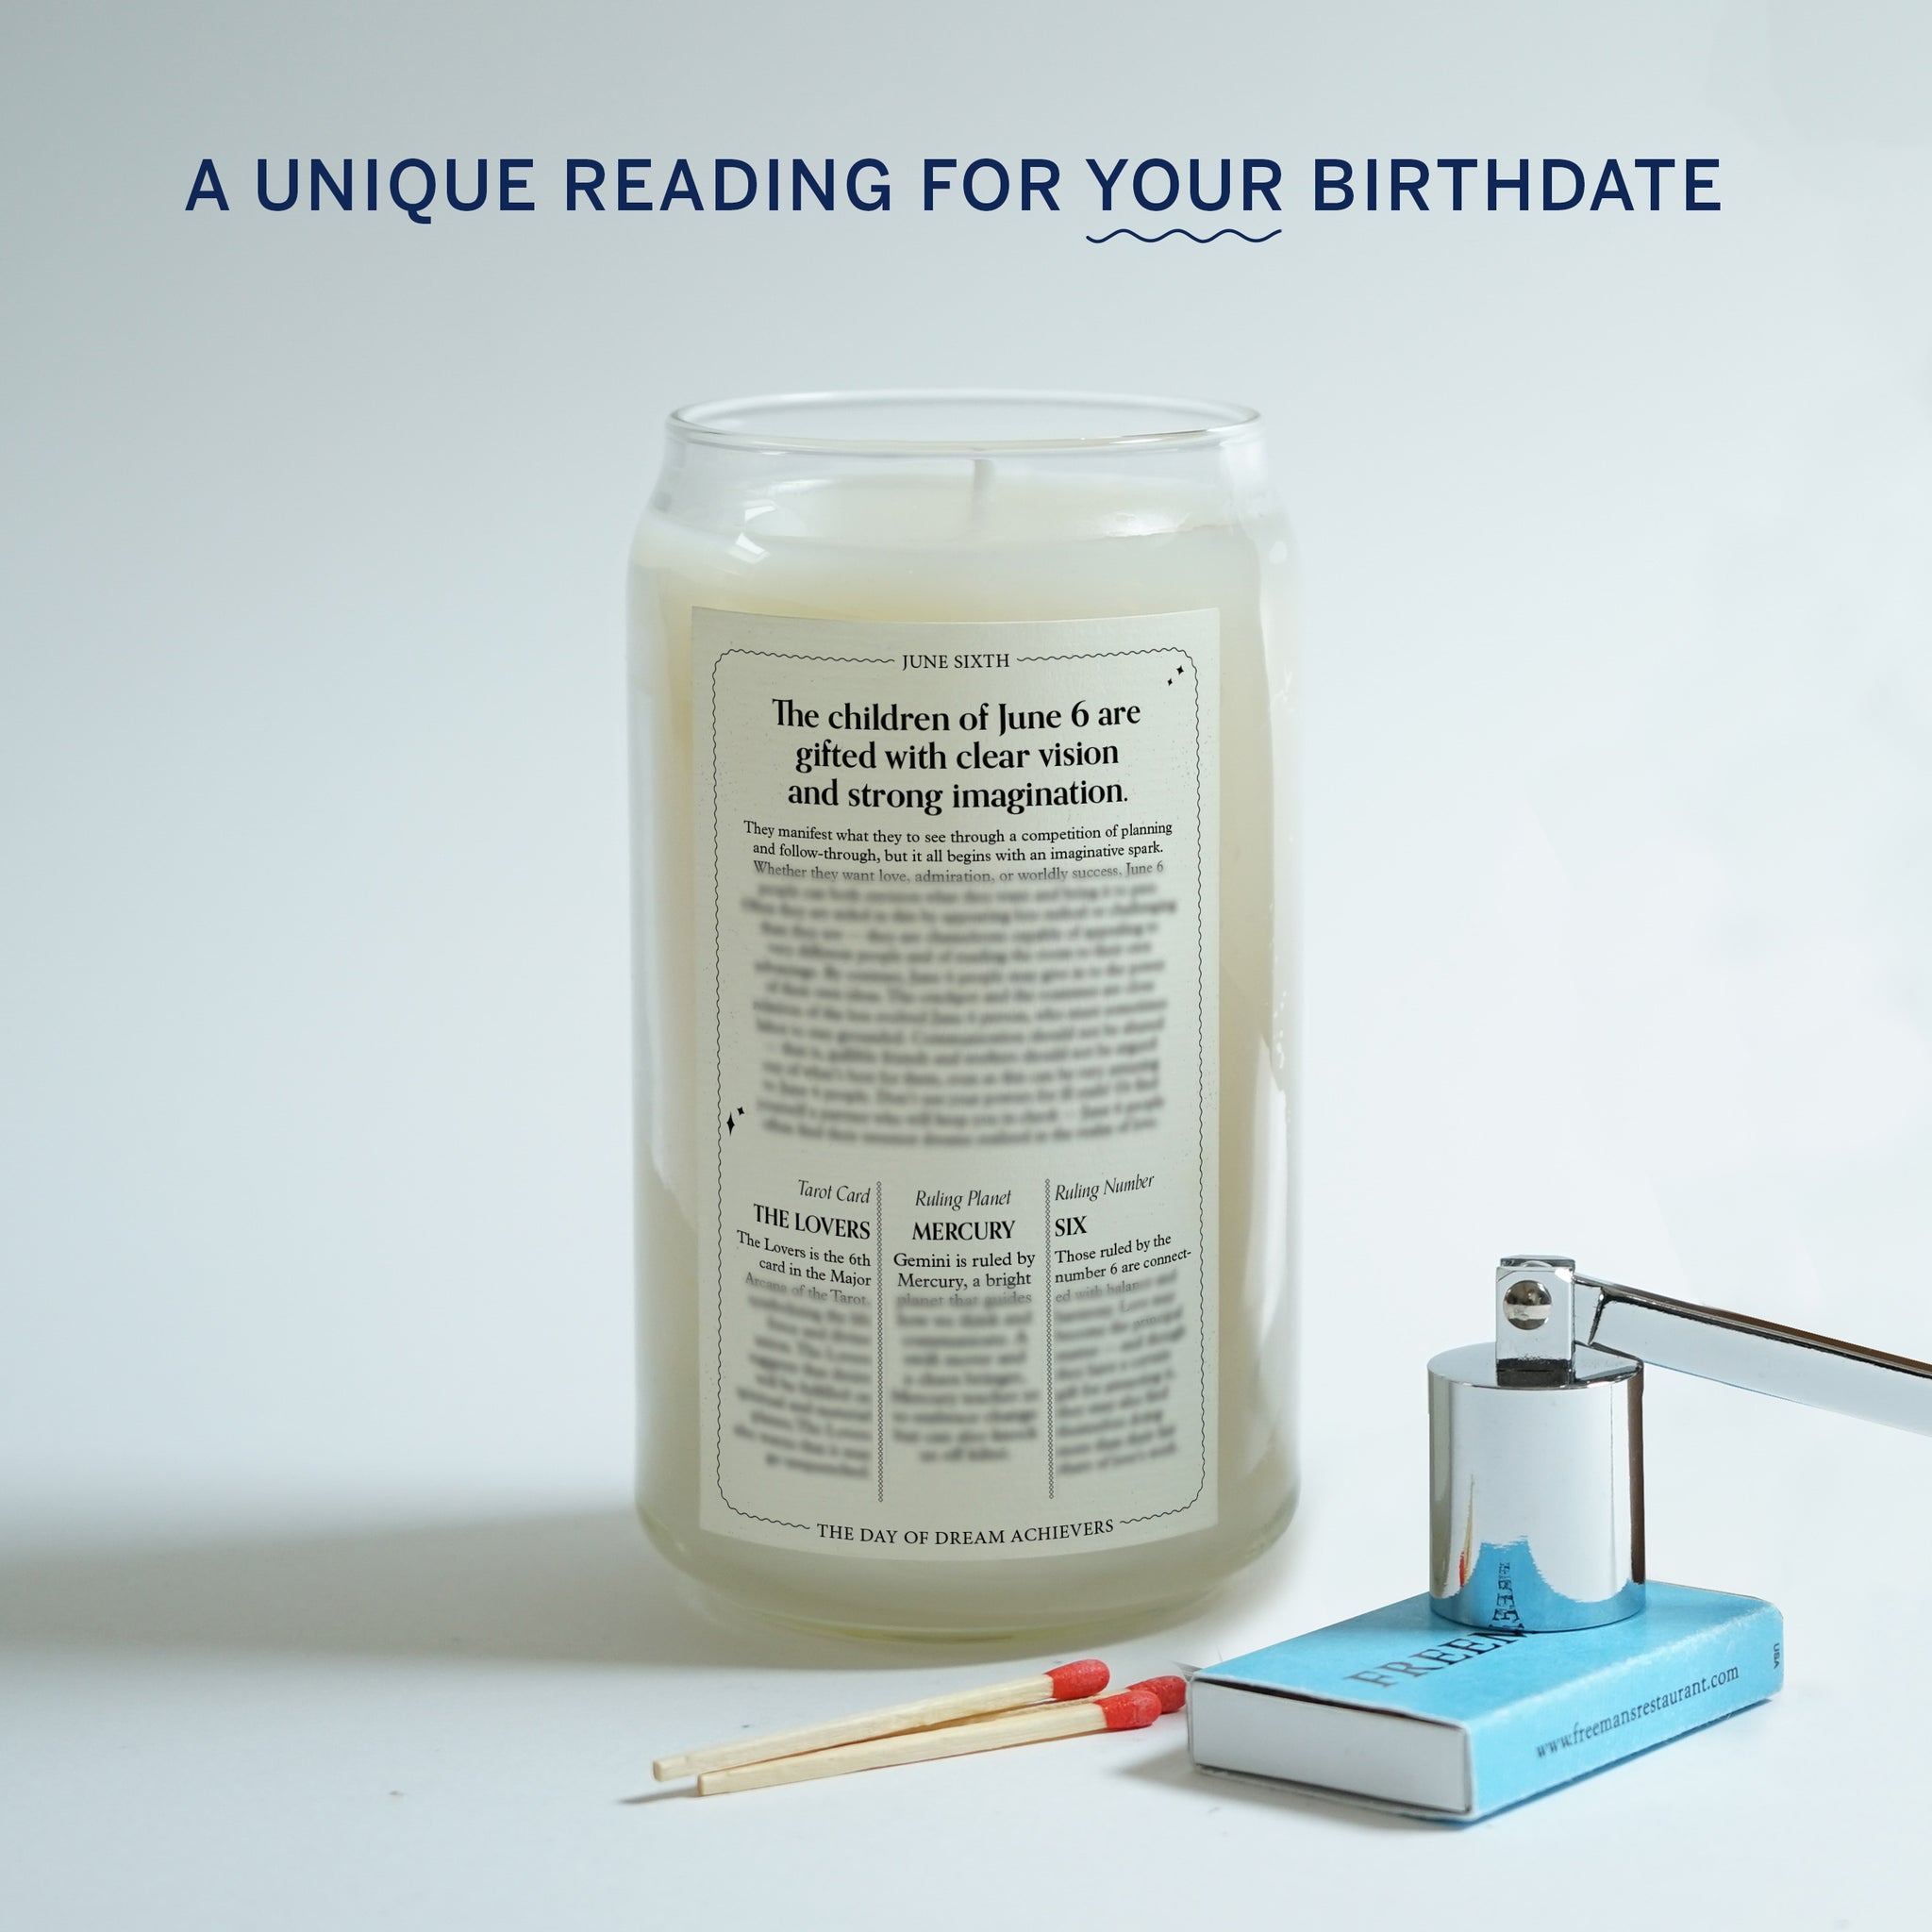 The Birthdate Candle back label